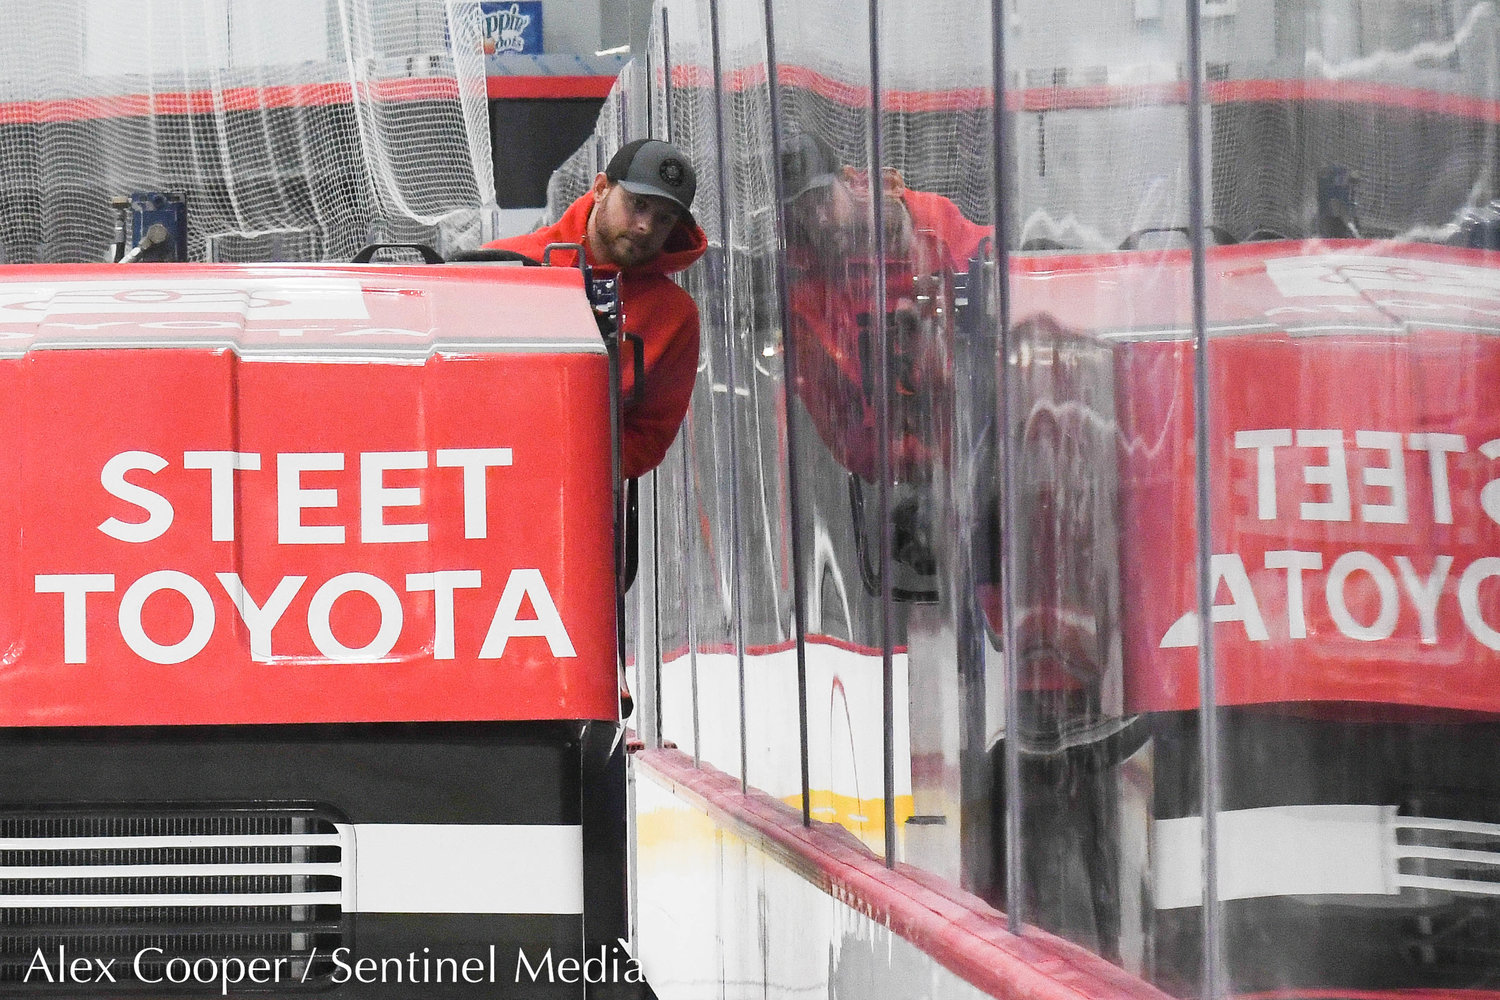 A zamboni driver polishes the ice inside the Nexus Center on Wednesday, Nov. 9 in Utica. The inaugural game will take place tonight between the NCDC Utica Jr. Comets and the Mercer Chiefs. The first tournament will take place from Nov. 11 to 13 for youth hockey teams.